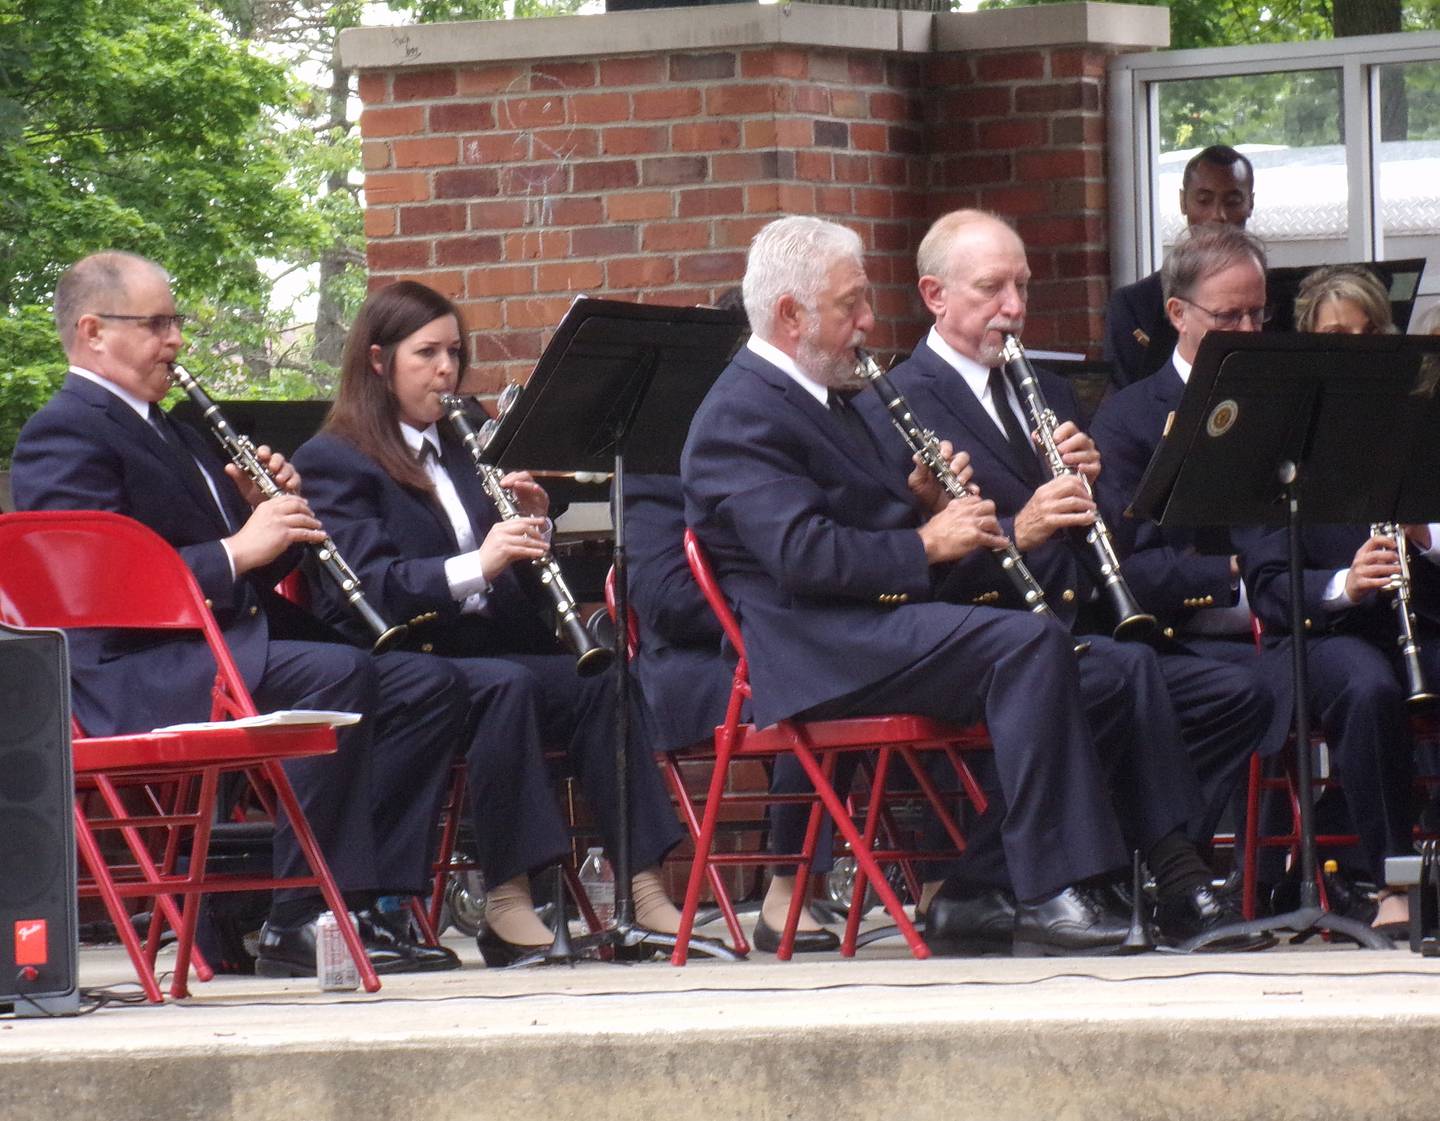 The Joliet American Legion Band performed Saturday, June 11, 2022, at the Plumb Pavilion in Streator's City Park.